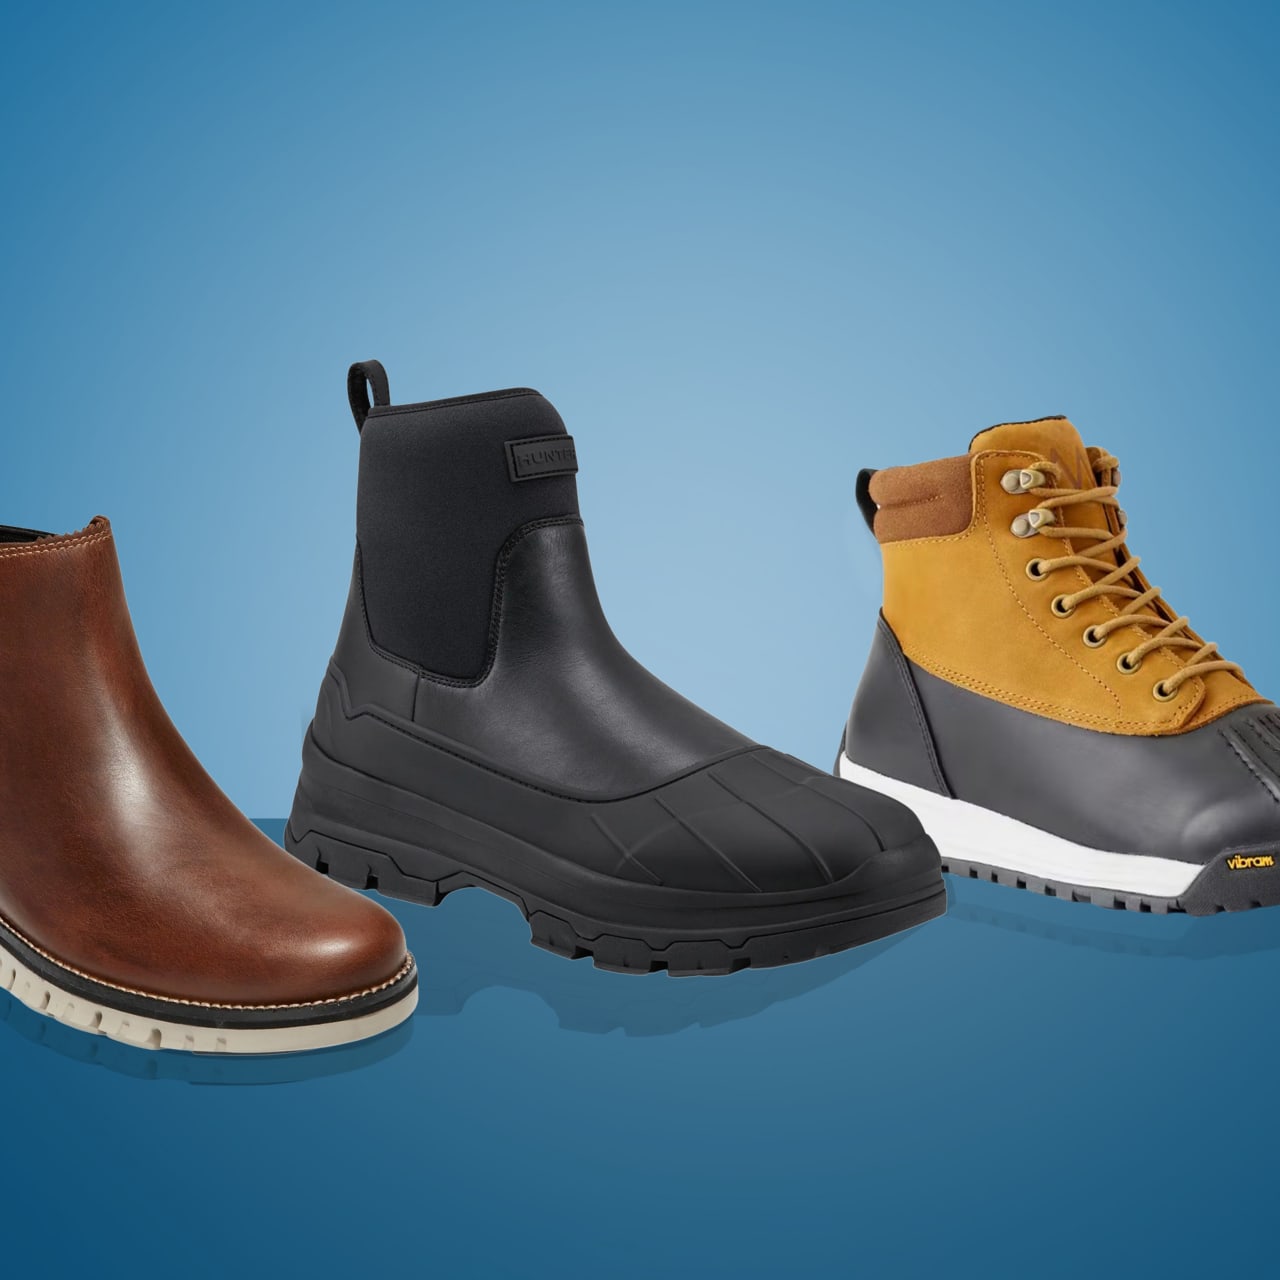 11 Best Winter Boots for Men (2021): Timberland, Dr. Martens, Blundstone,  and More